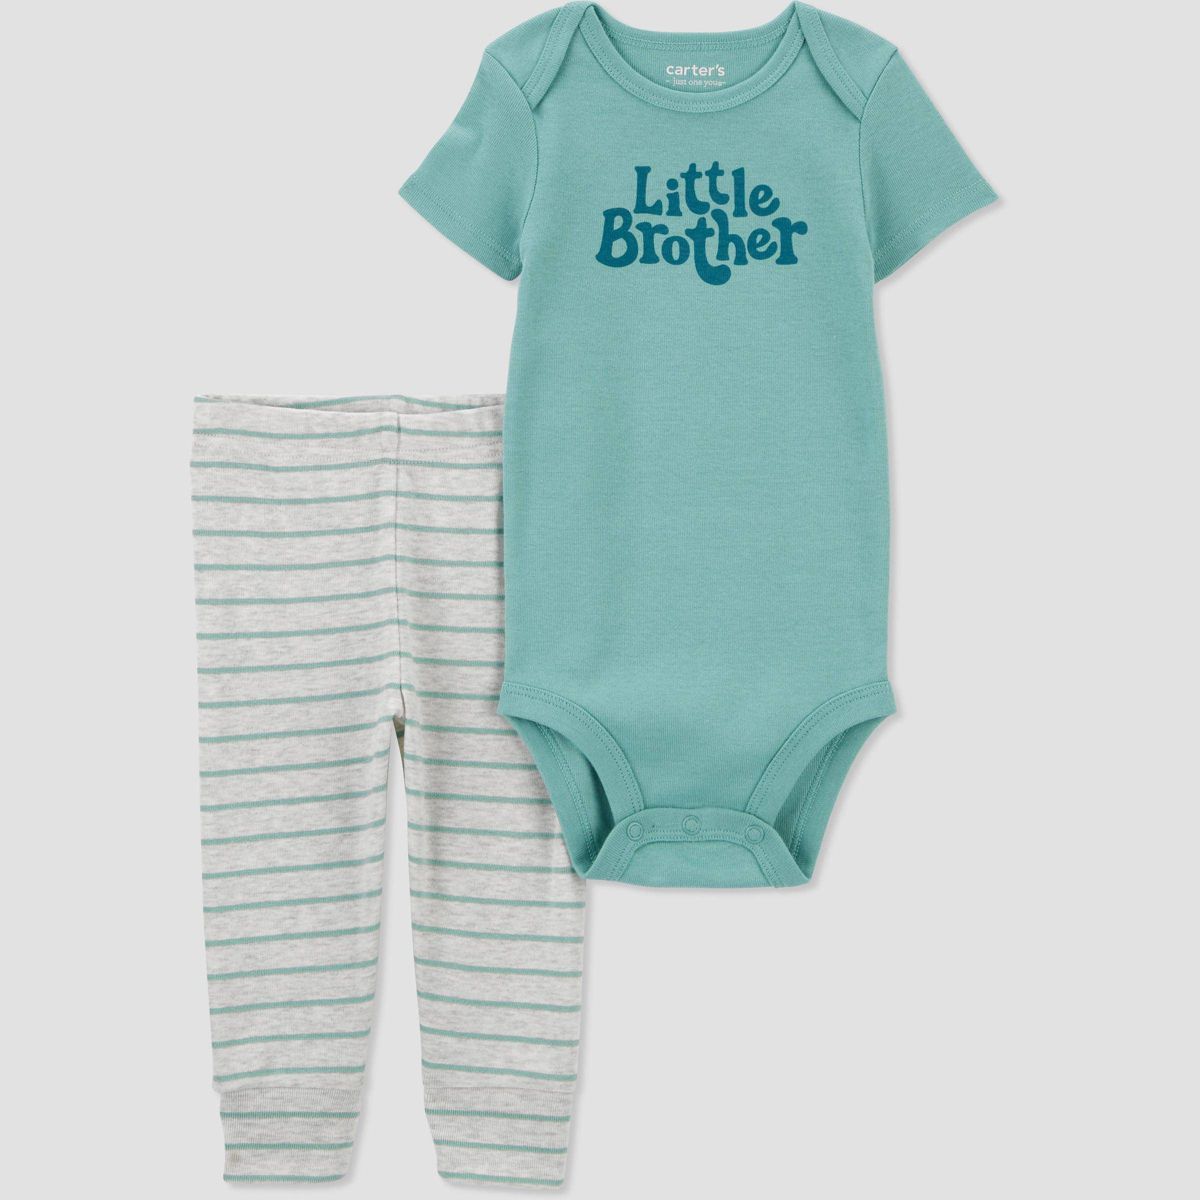 Carter's Just One You®️ Baby 2pc Family Love Little Brother Top & Bottom Set - Green | Target